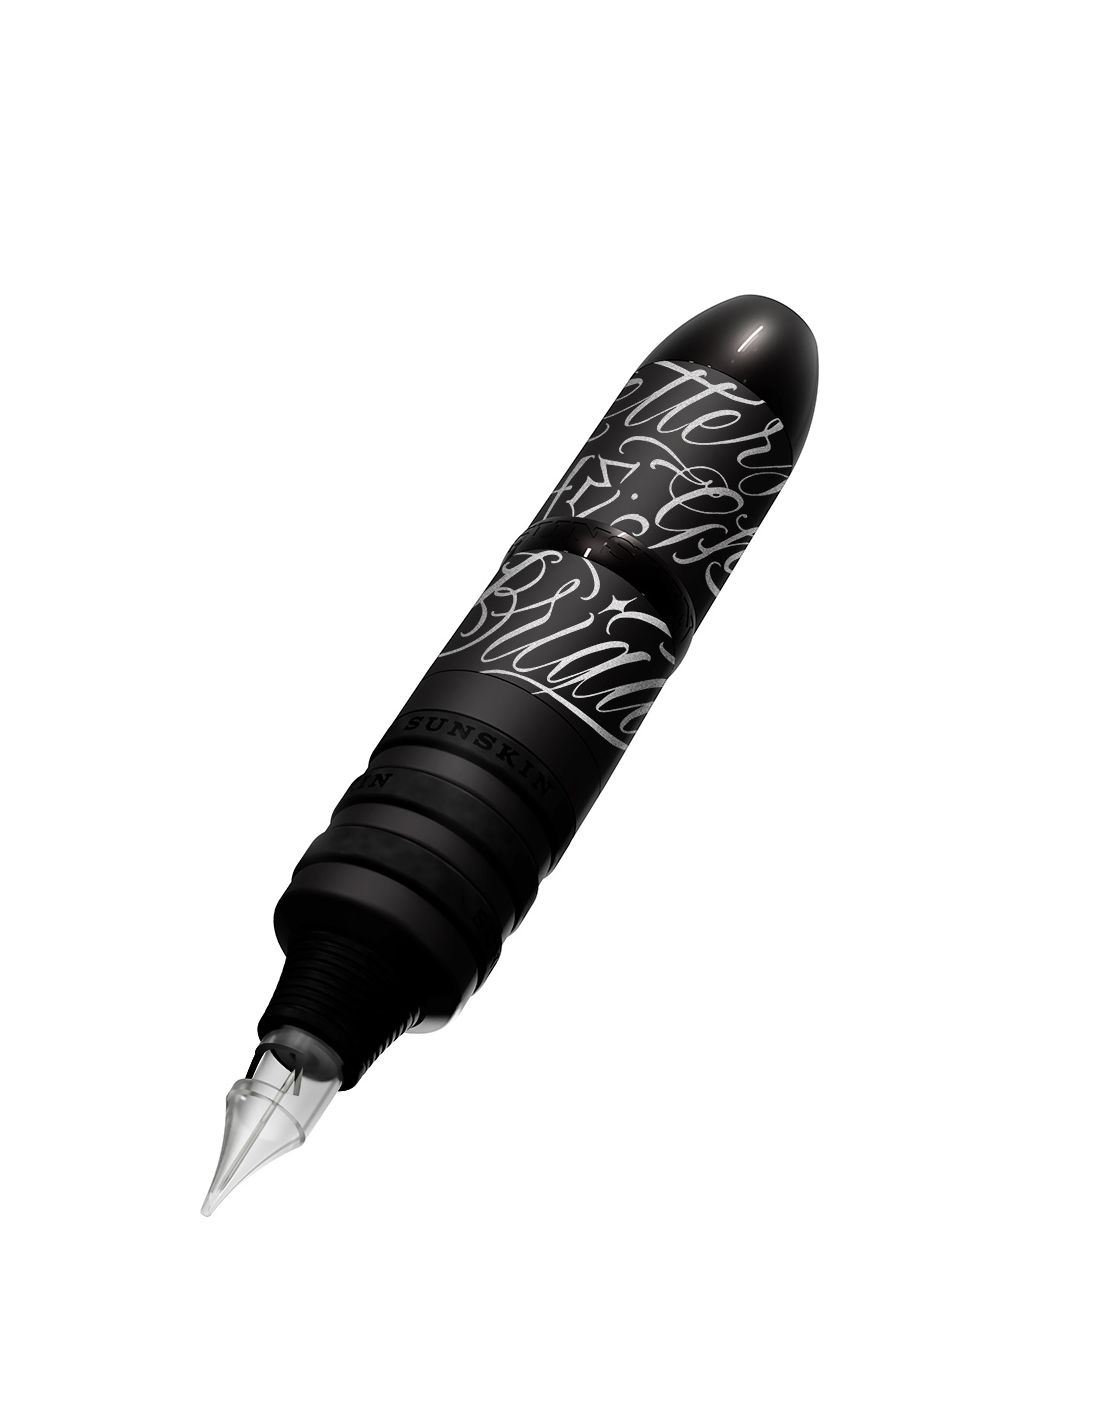 Tattoo pen, easily run lines, coloring and shading.